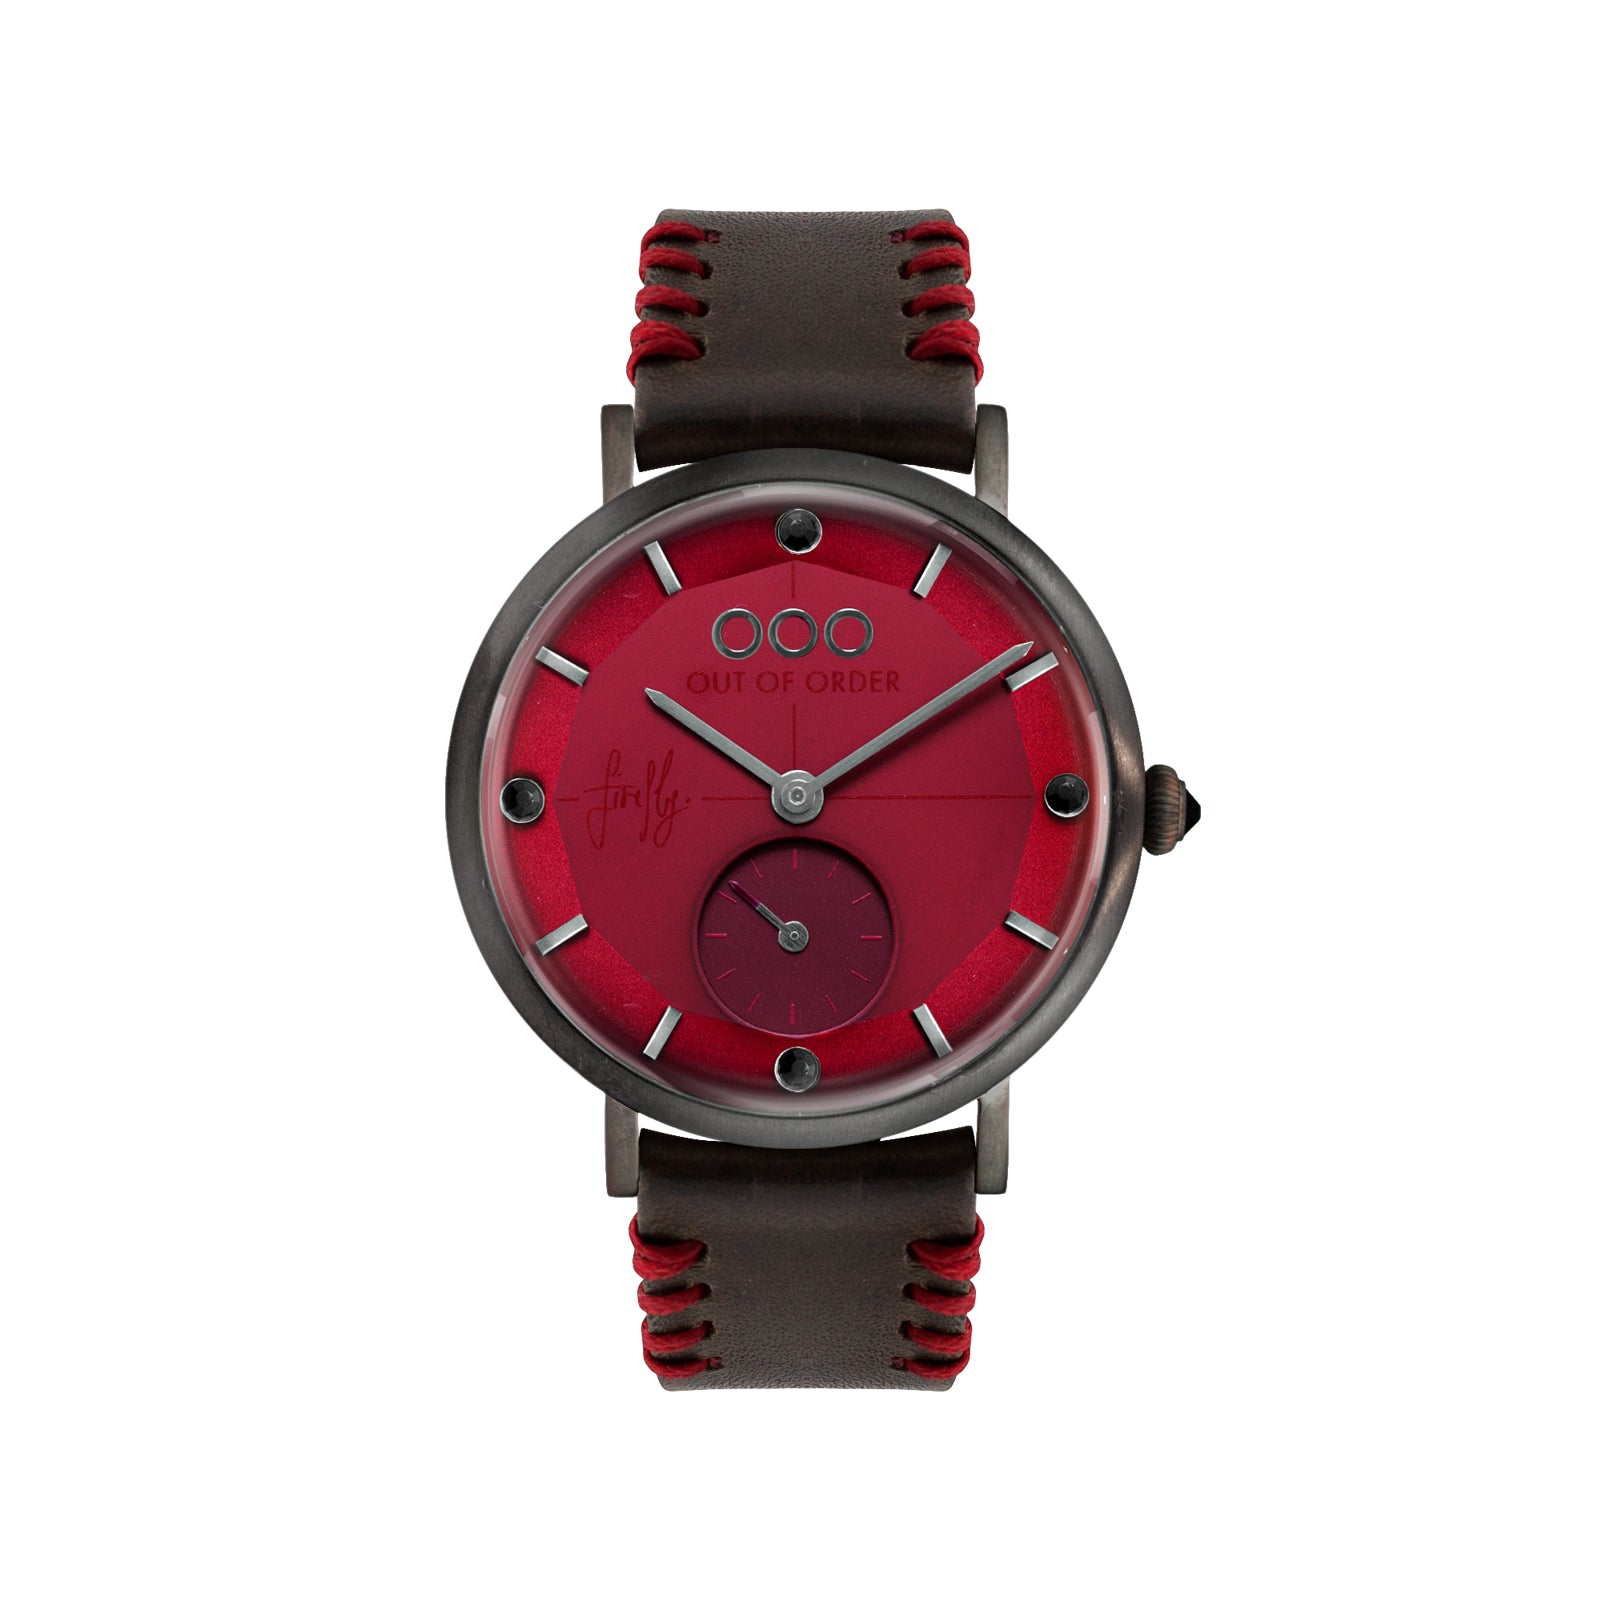 Red Firefly 41 mm - Out of Order Watches - Made in Italy - Front view